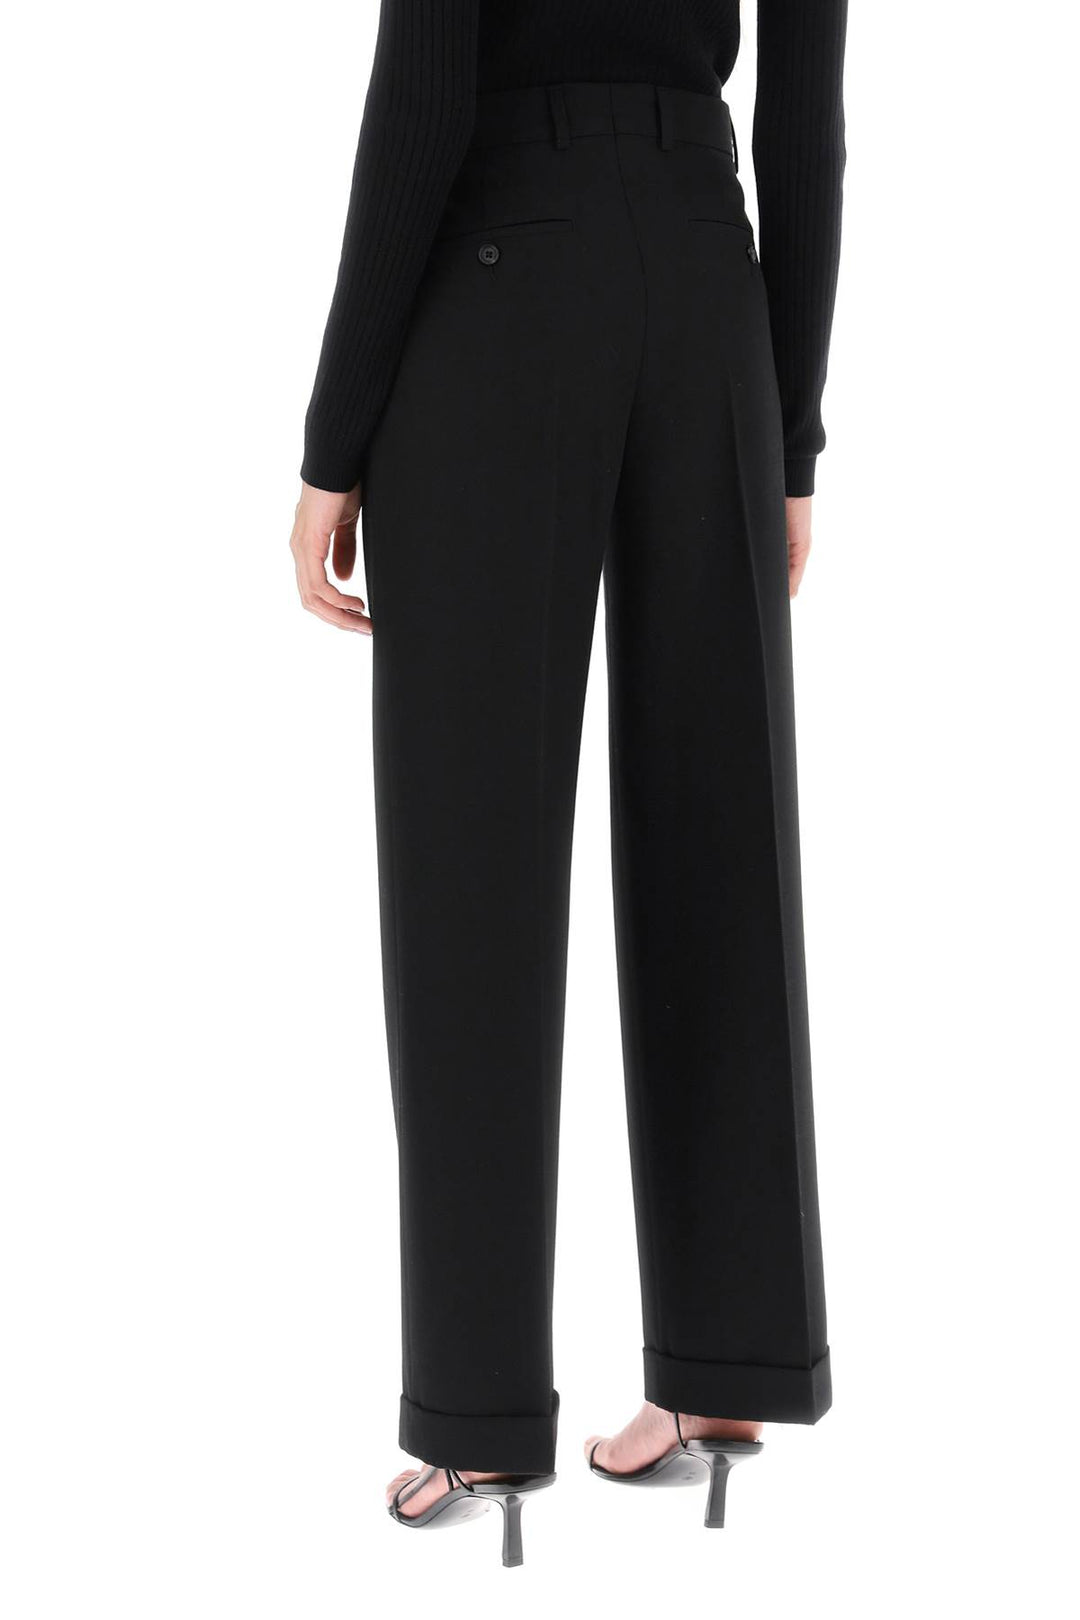 Toteme Cuffed Straight Trousers   Black